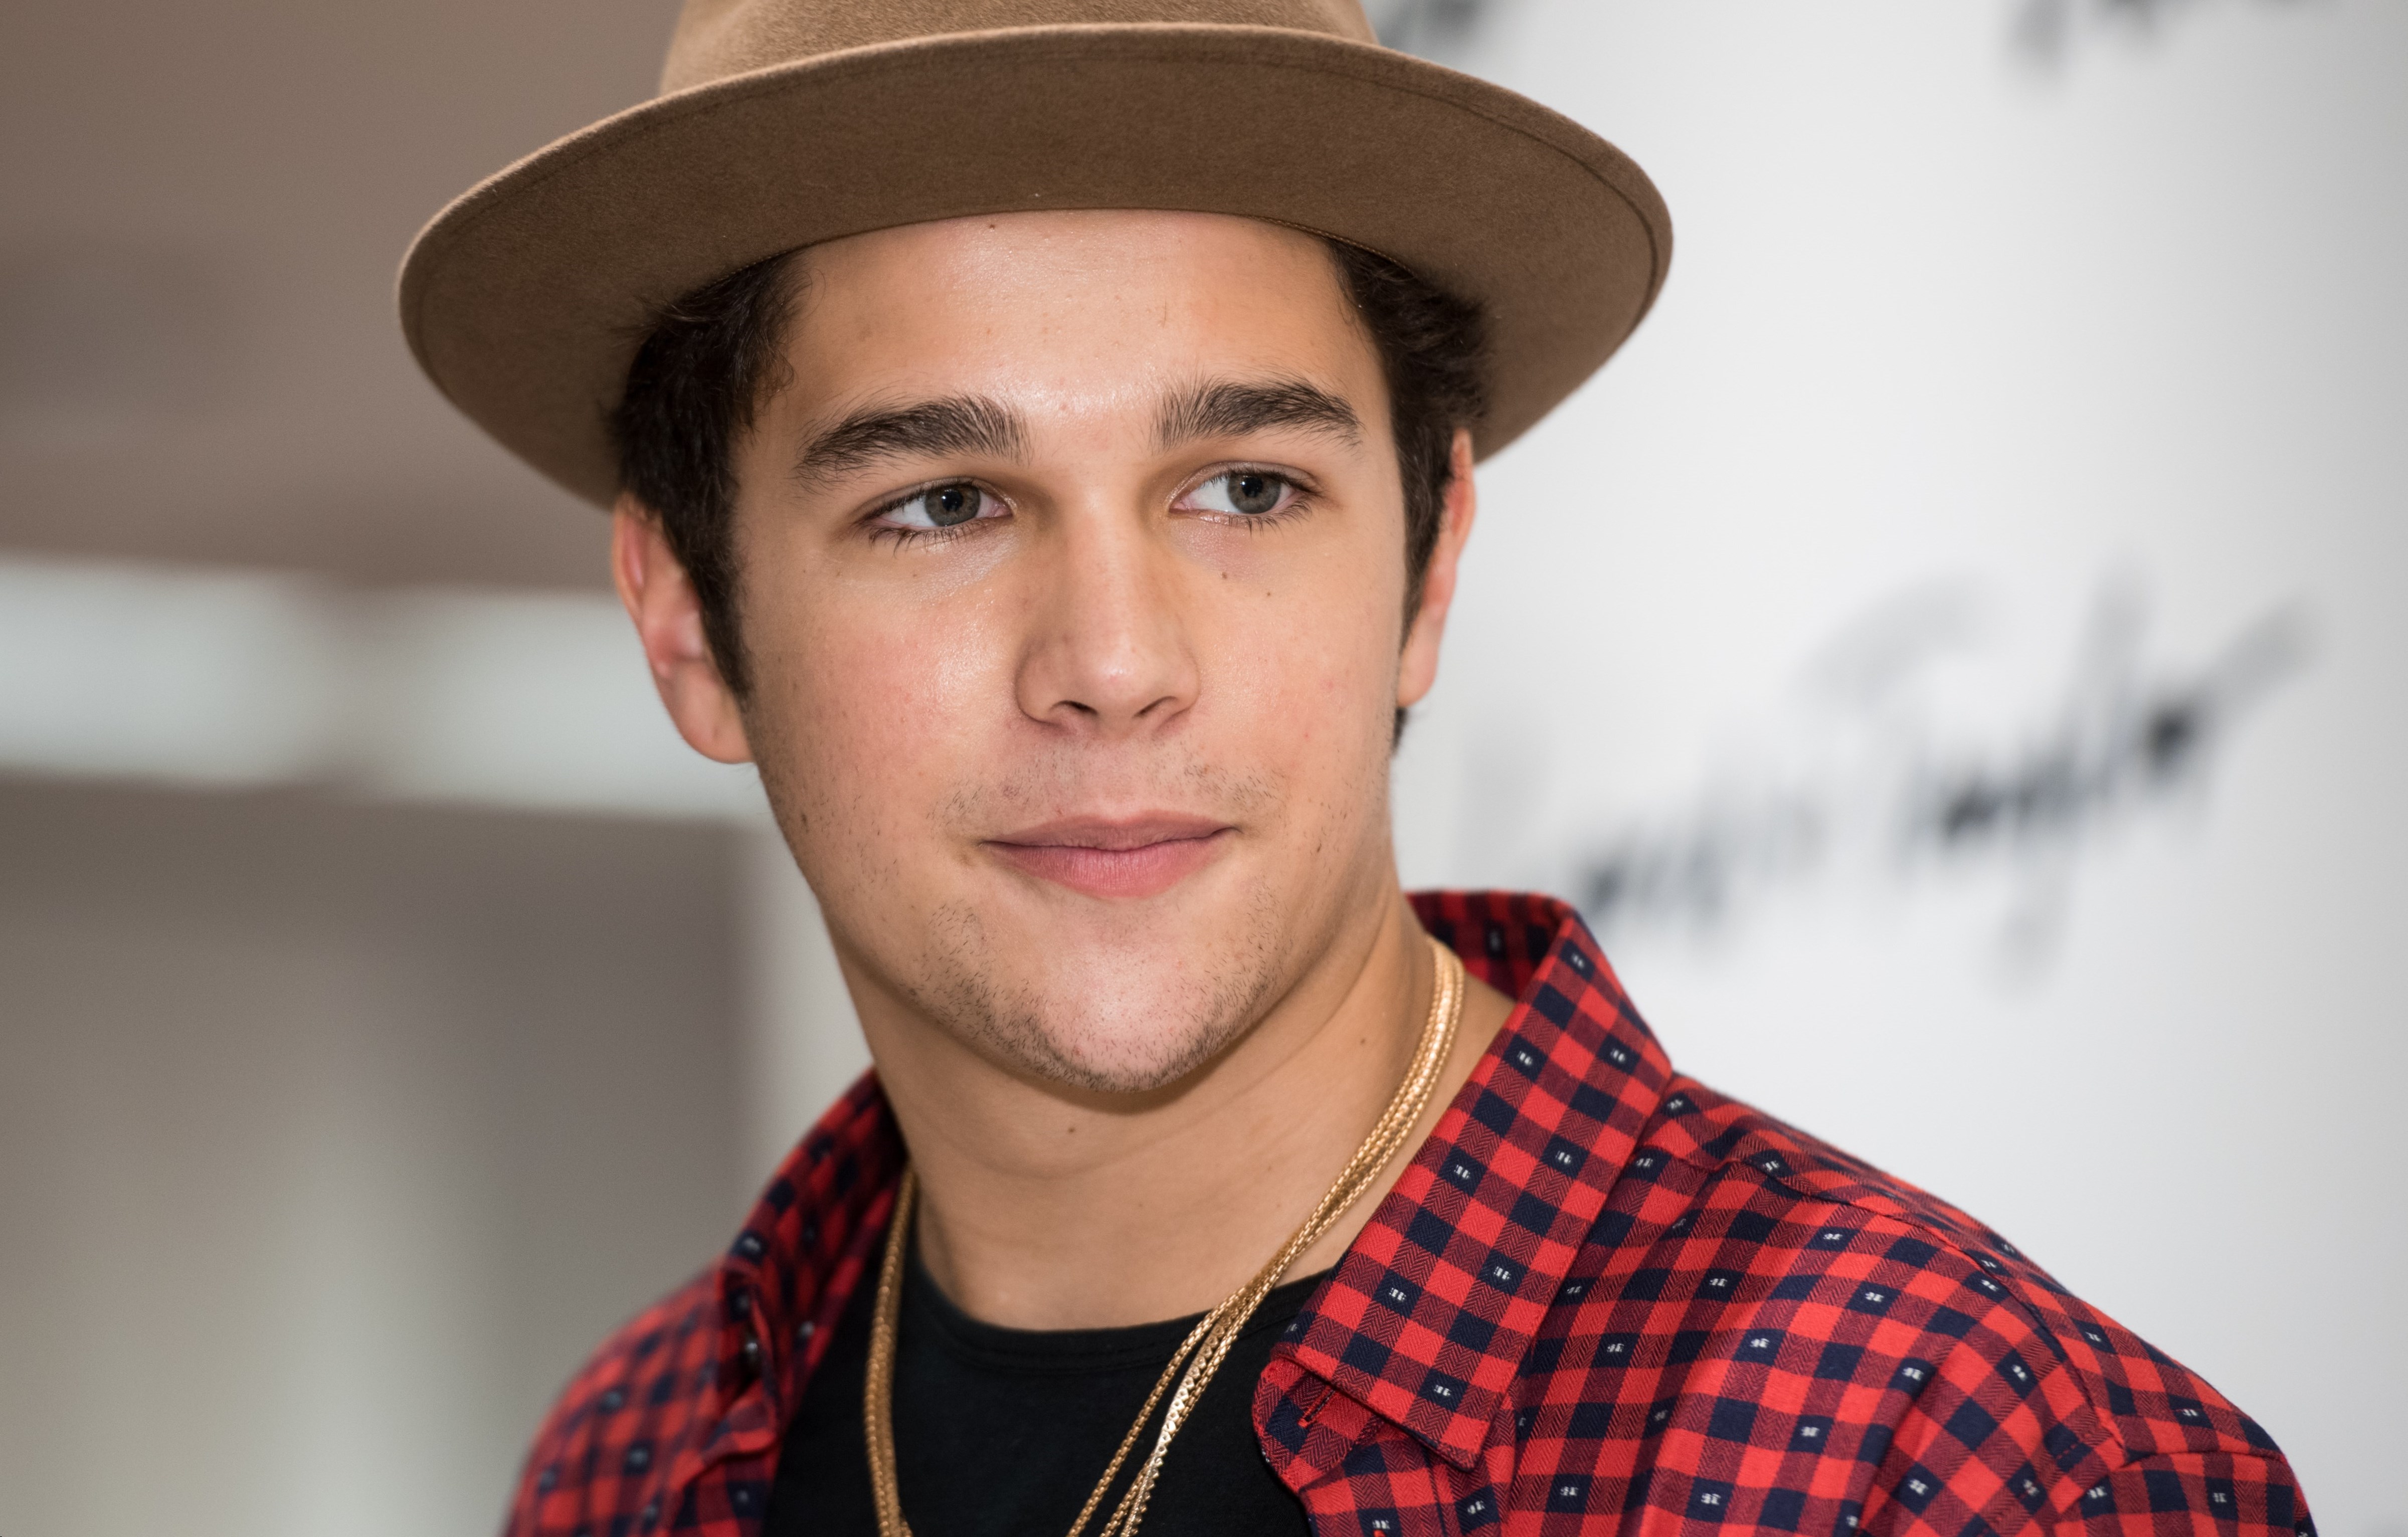 Austin Mahone wearing a red checkered shirt and a brown cap